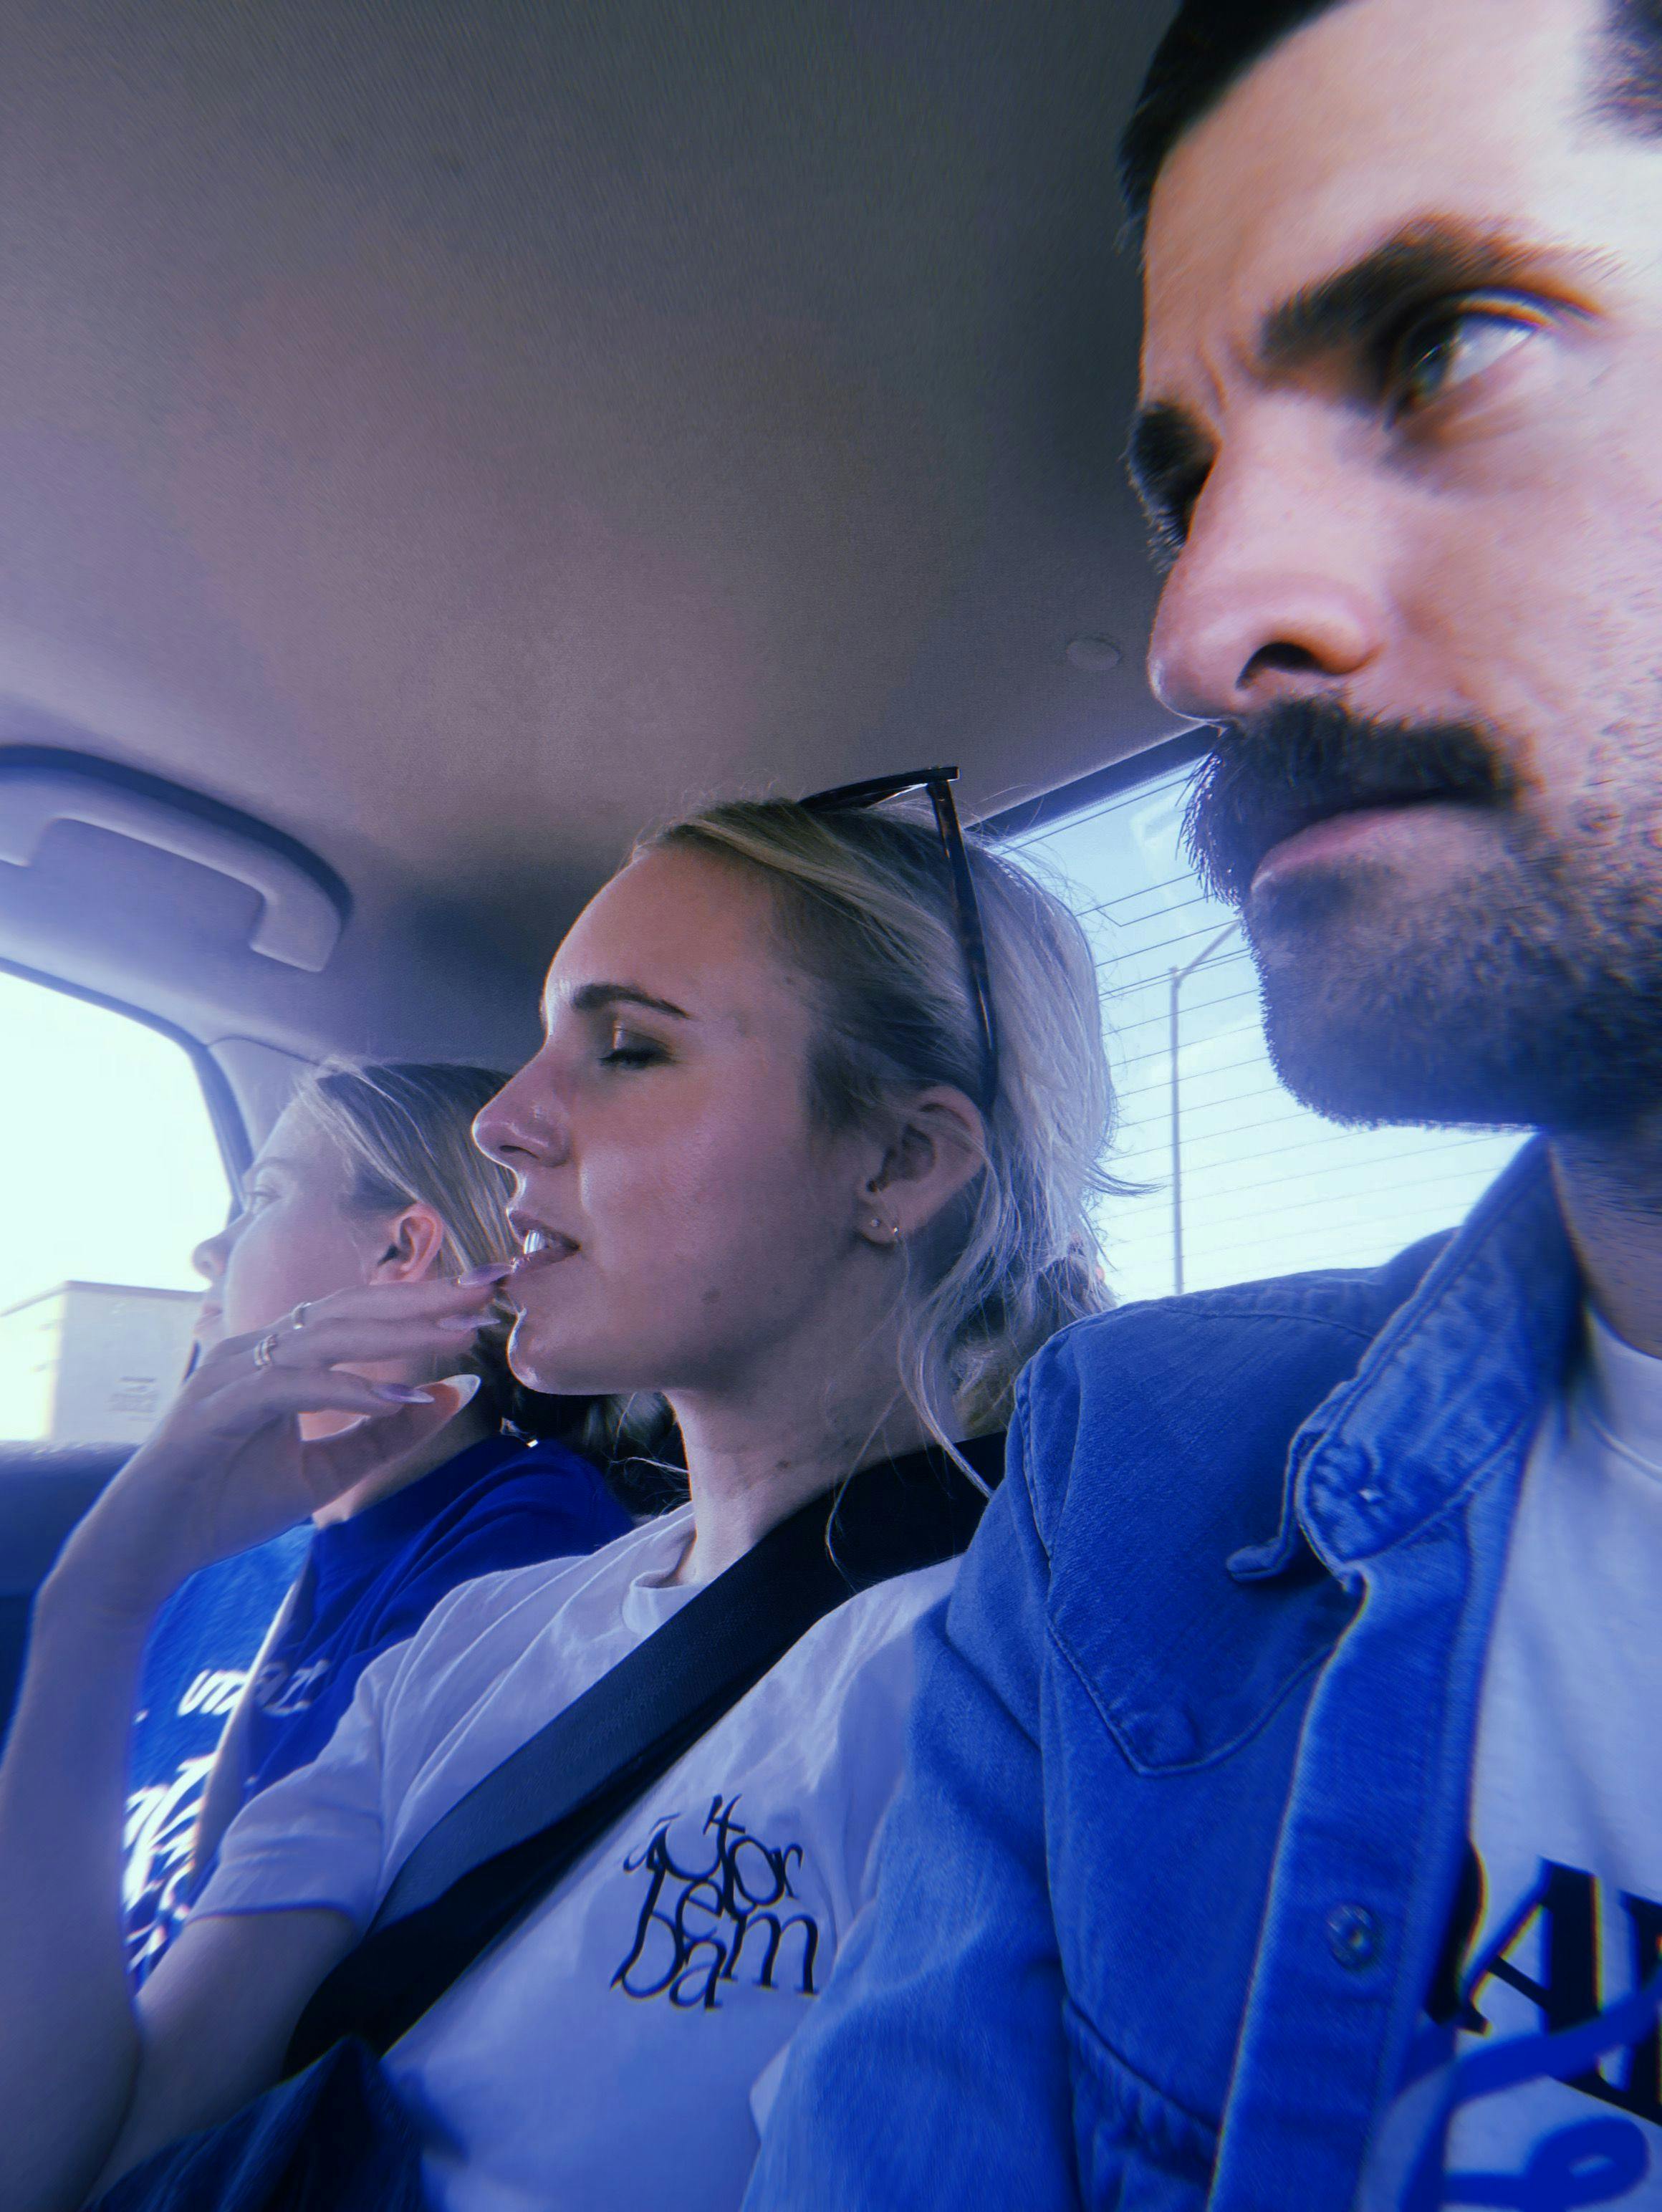 A pretty solid squad in the backseat on the way to some event